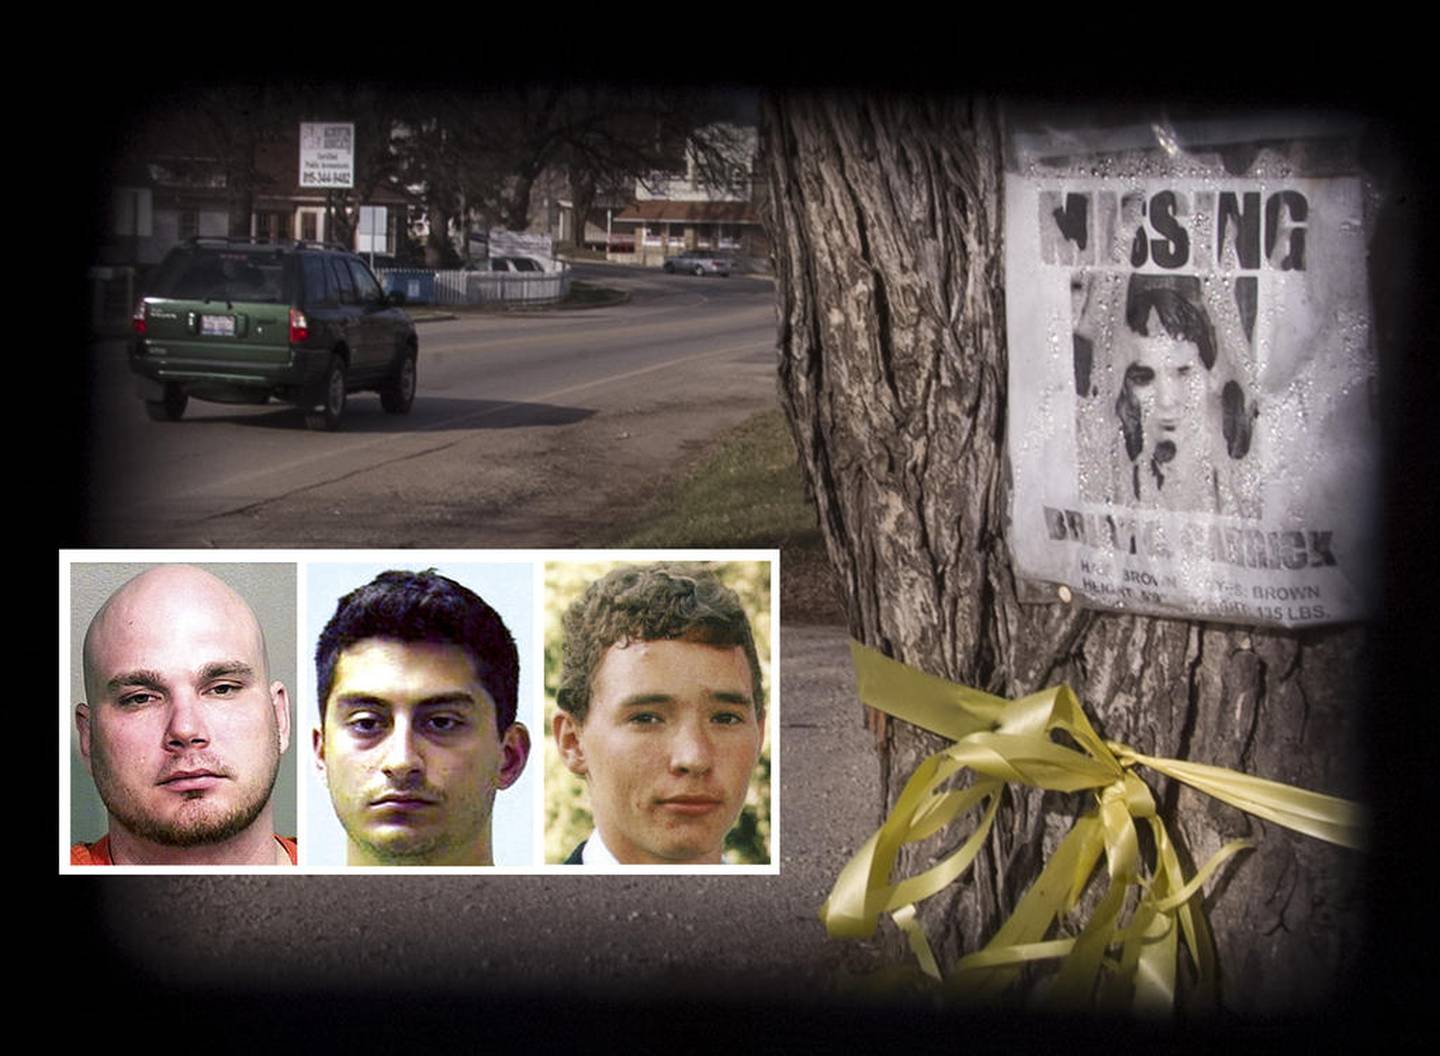 A missing poster and yellow ribbon for missing Brian Carrick are seen Dec. 2, 2003, on a tree in Johnsburg. The murder conviction of Mario Casciaro was unanimously overturned in September 2015 by the Second District Appellate Court of Illinois. The state’s key witness in the case, Shane Lamb, had recanted his statements in an affidavit, saying his testimony that convicted Casciaro was all a lie. INSET: Lamb (from left to right), Casciaro and Carrick.